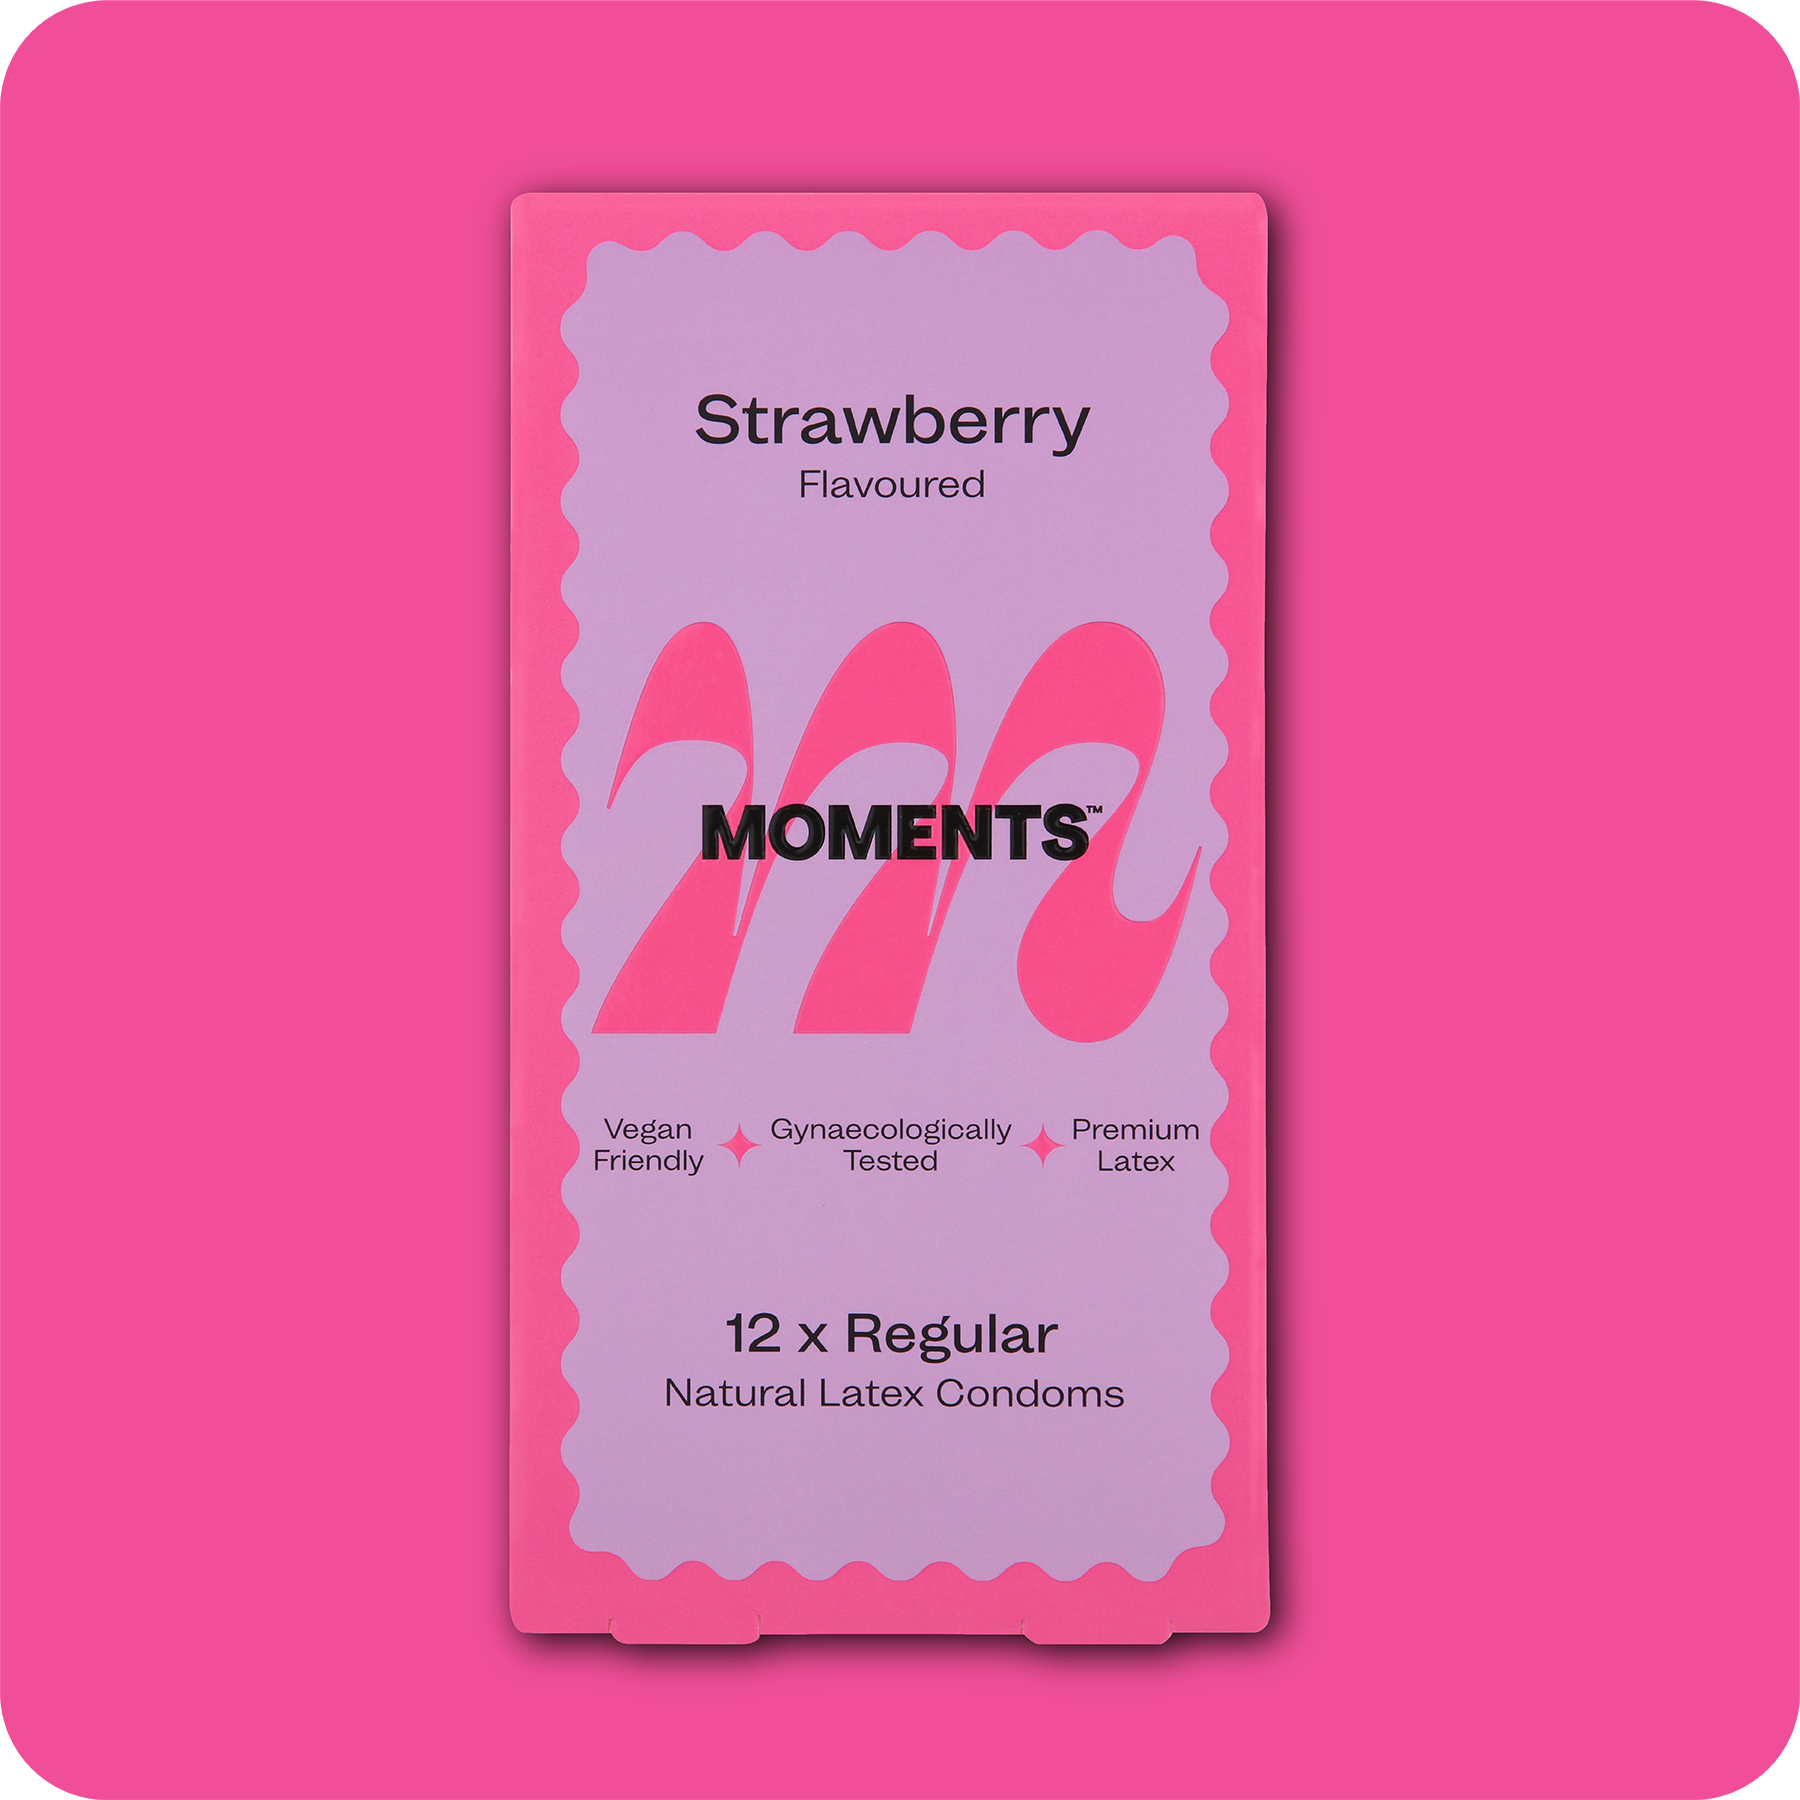 Moments Strawberry flavoured condom in pink packaging